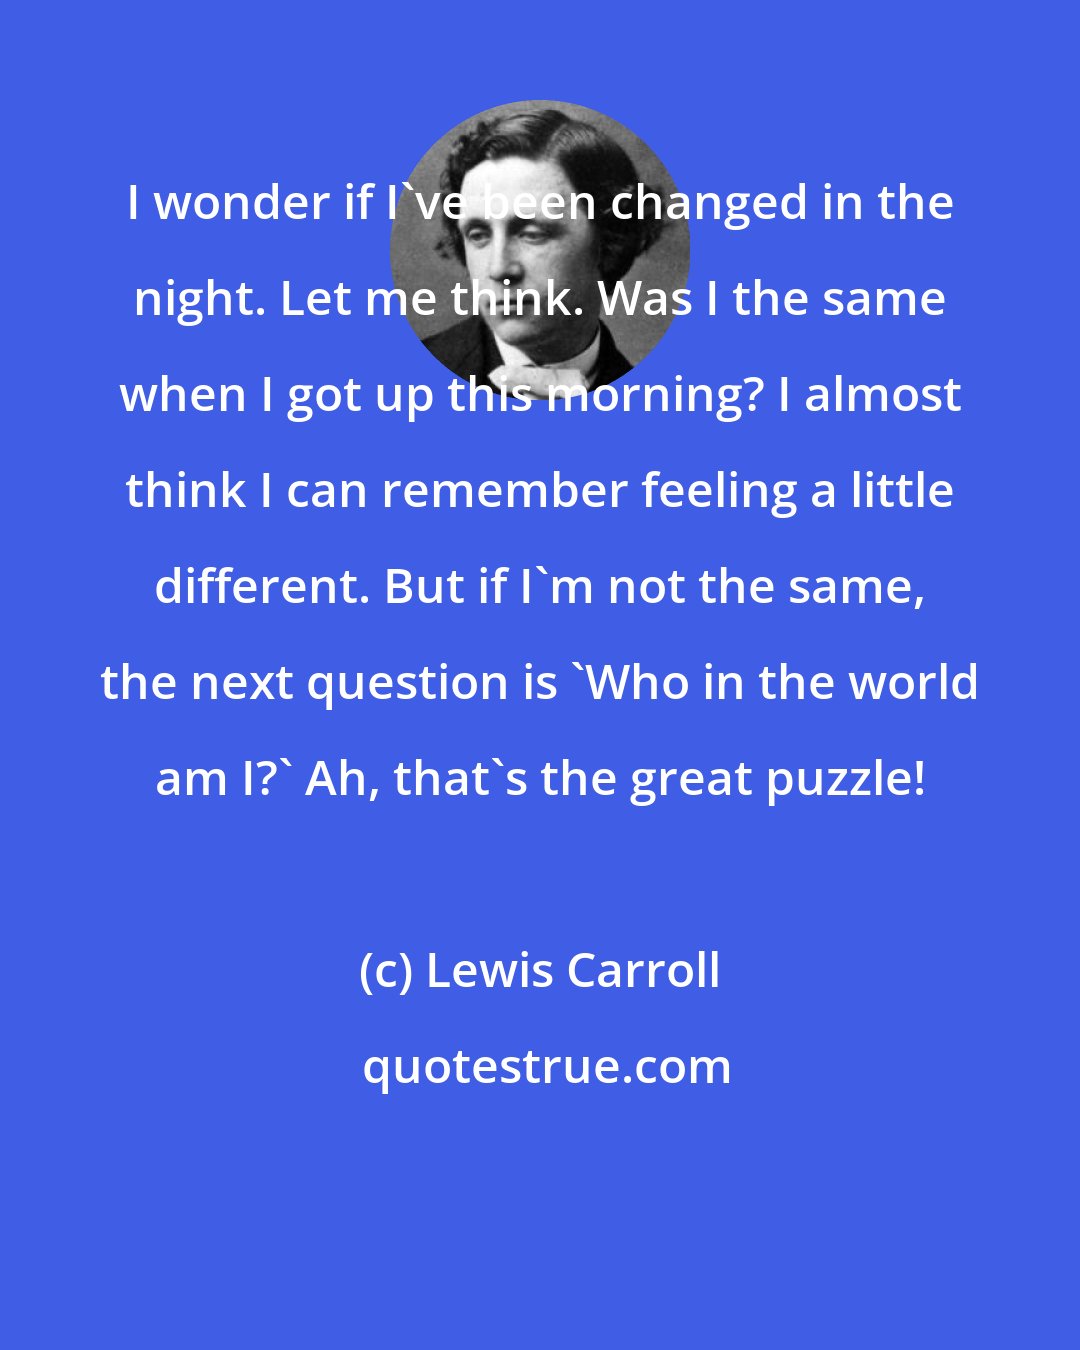 Lewis Carroll: I wonder if I've been changed in the night. Let me think. Was I the same when I got up this morning? I almost think I can remember feeling a little different. But if I'm not the same, the next question is 'Who in the world am I?' Ah, that's the great puzzle!